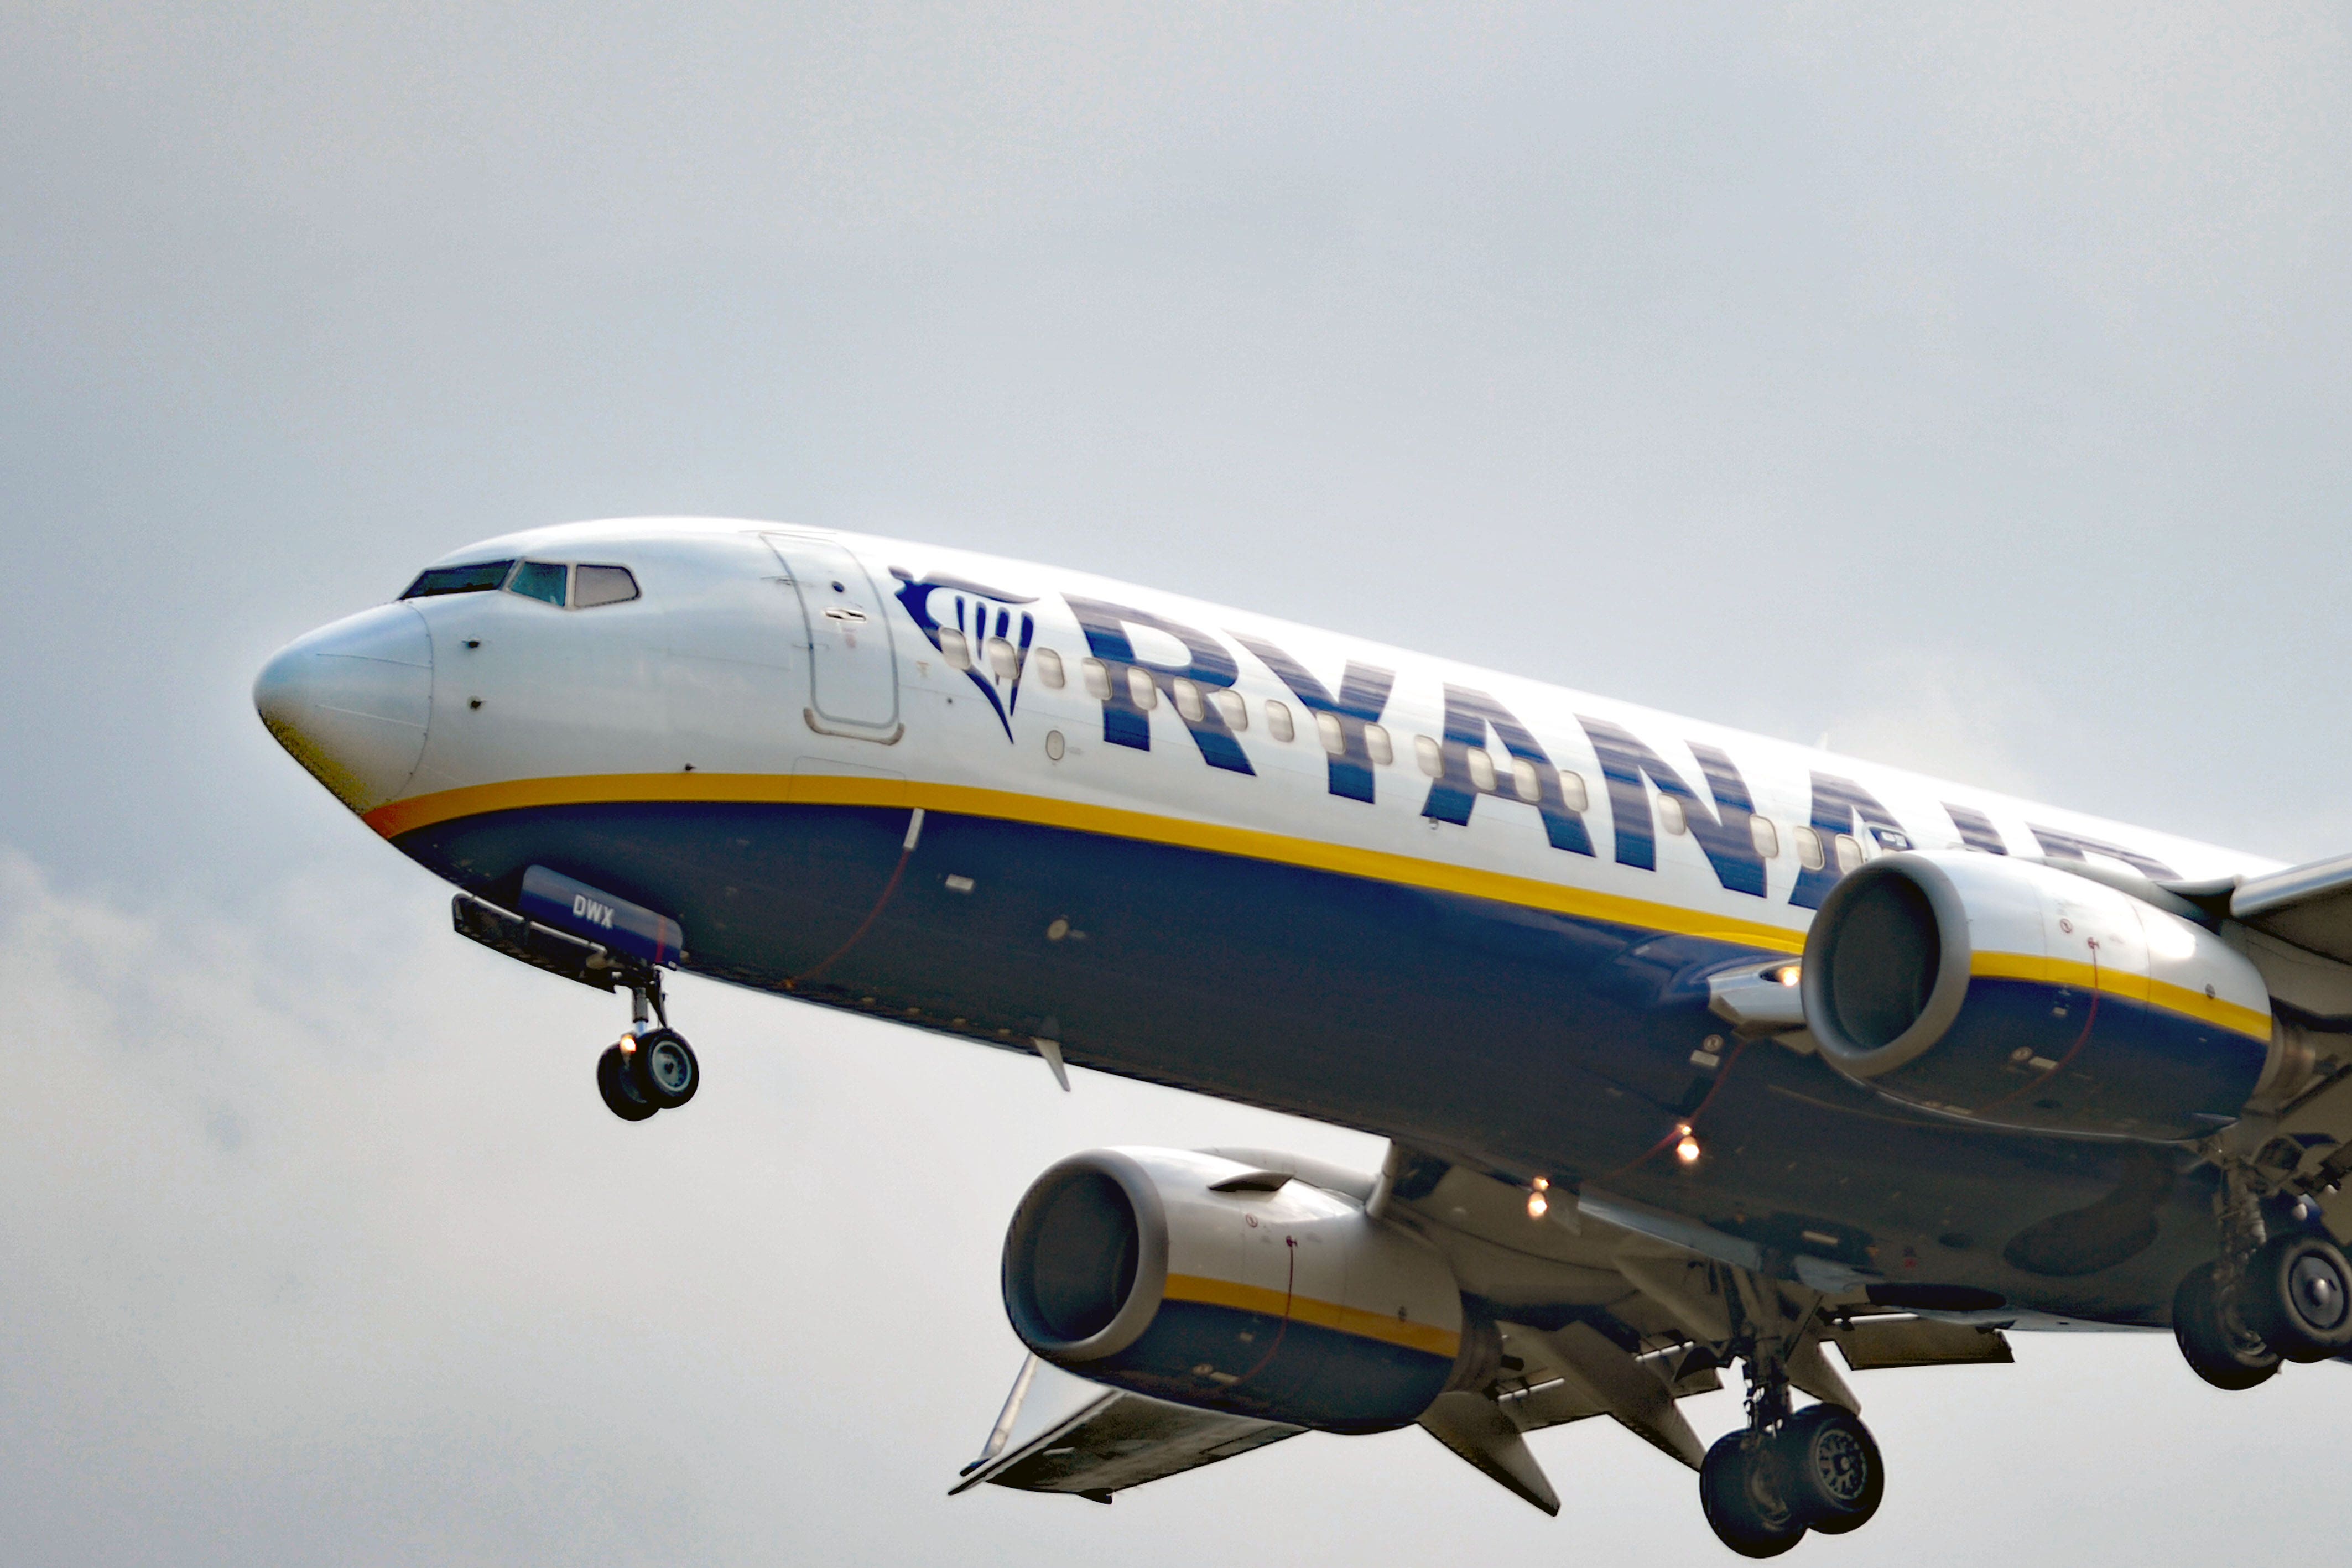 Ryanair also revealed sharply falling profits following a surge in fuel costs